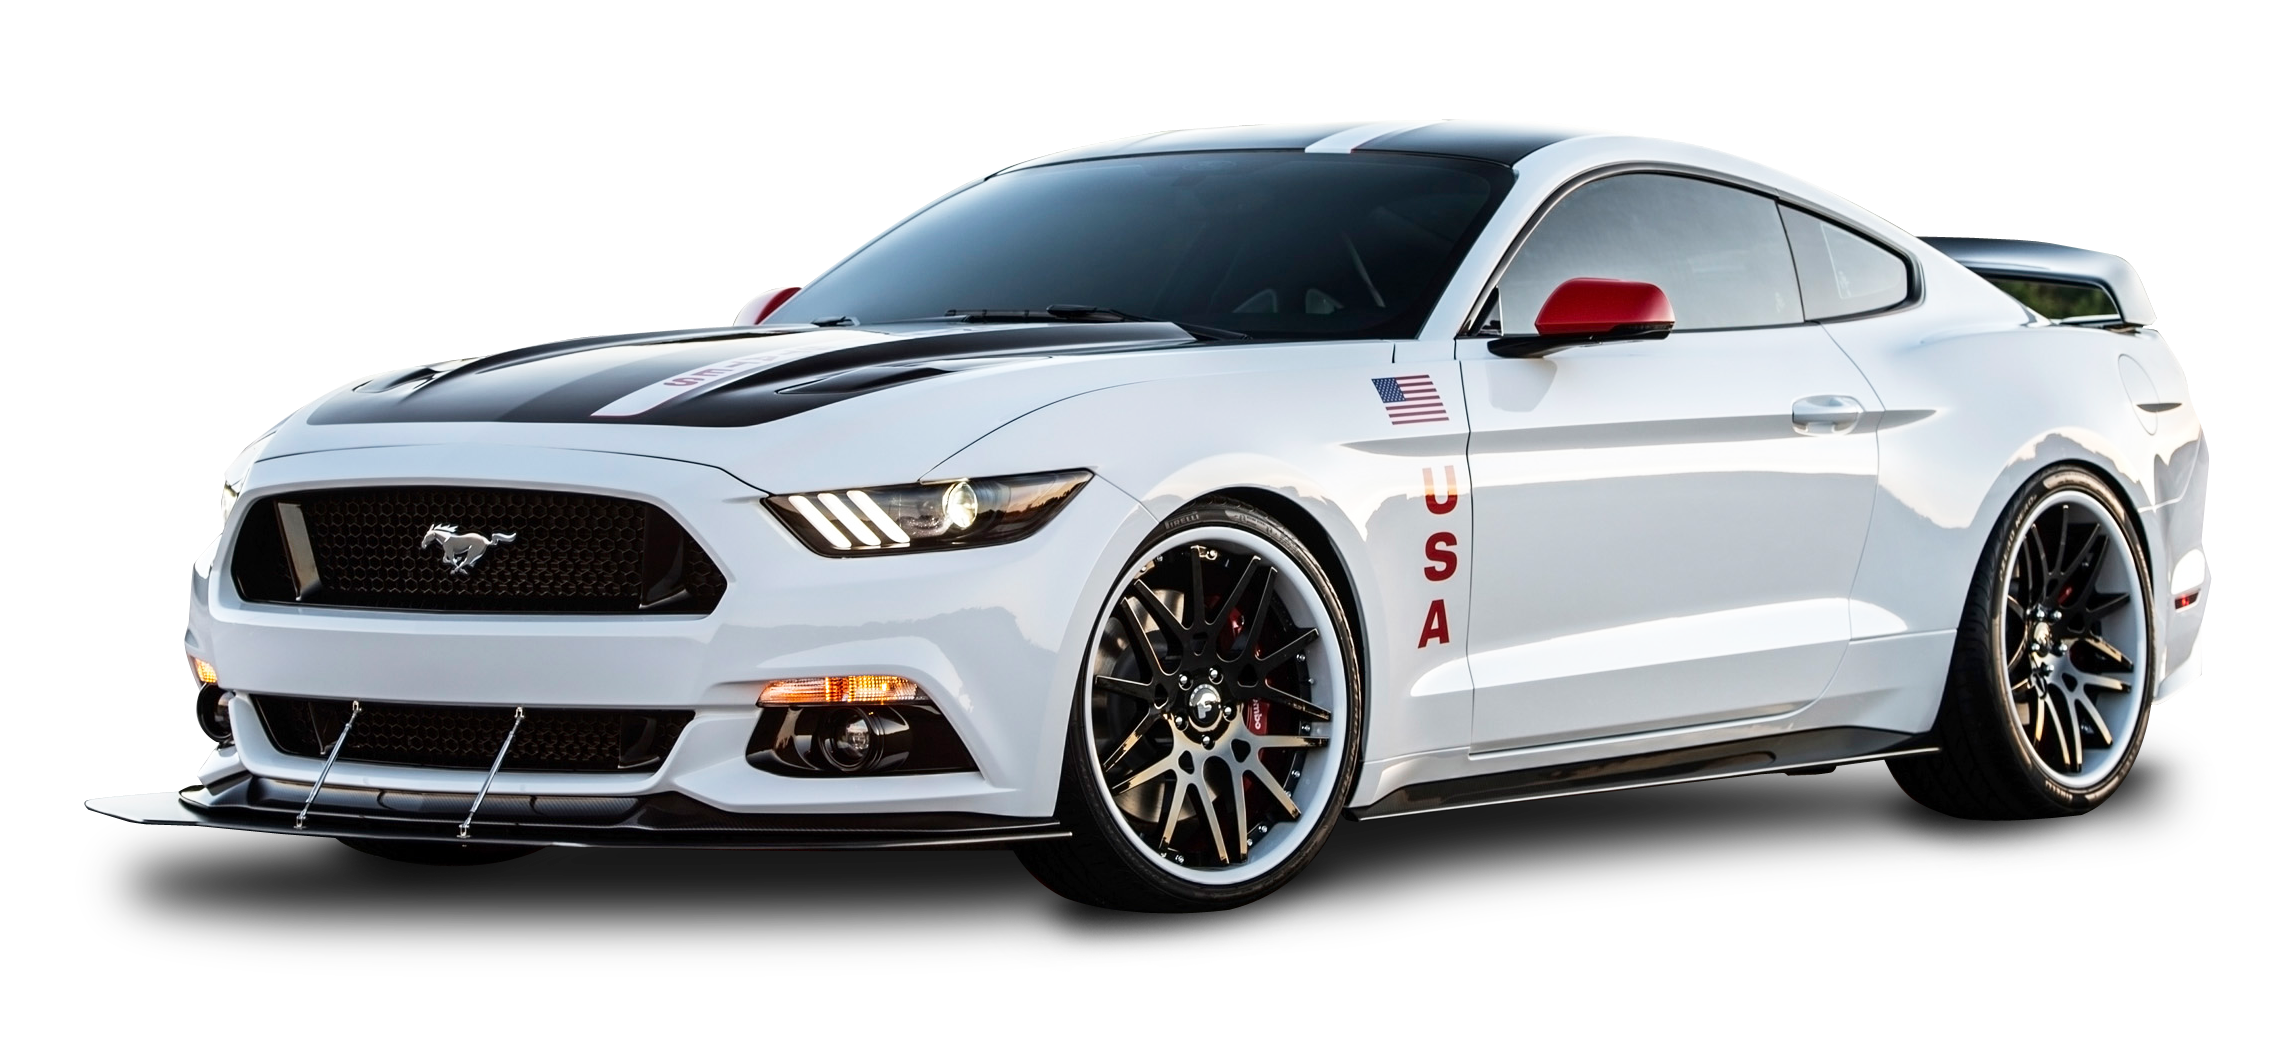 White Ford Mustang Apollo Car PNG Image PurePNG Free transparent